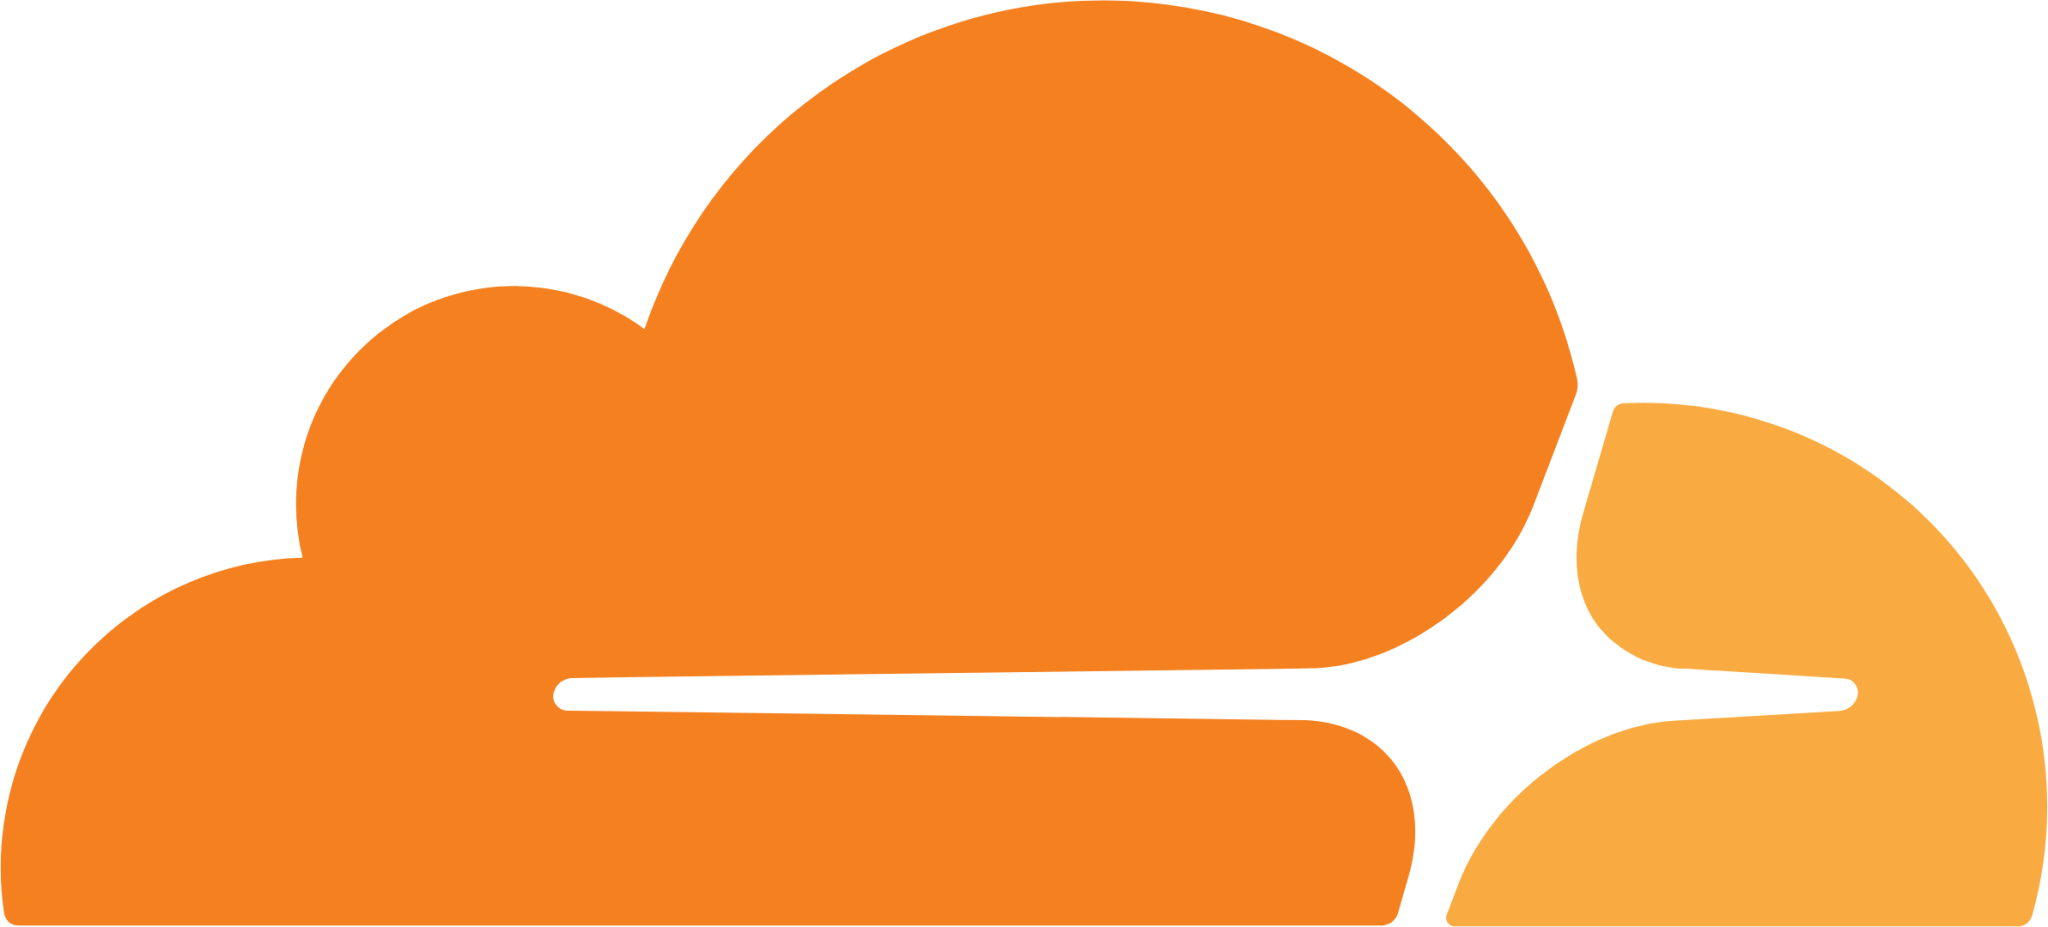 Deployed by Cloudflare